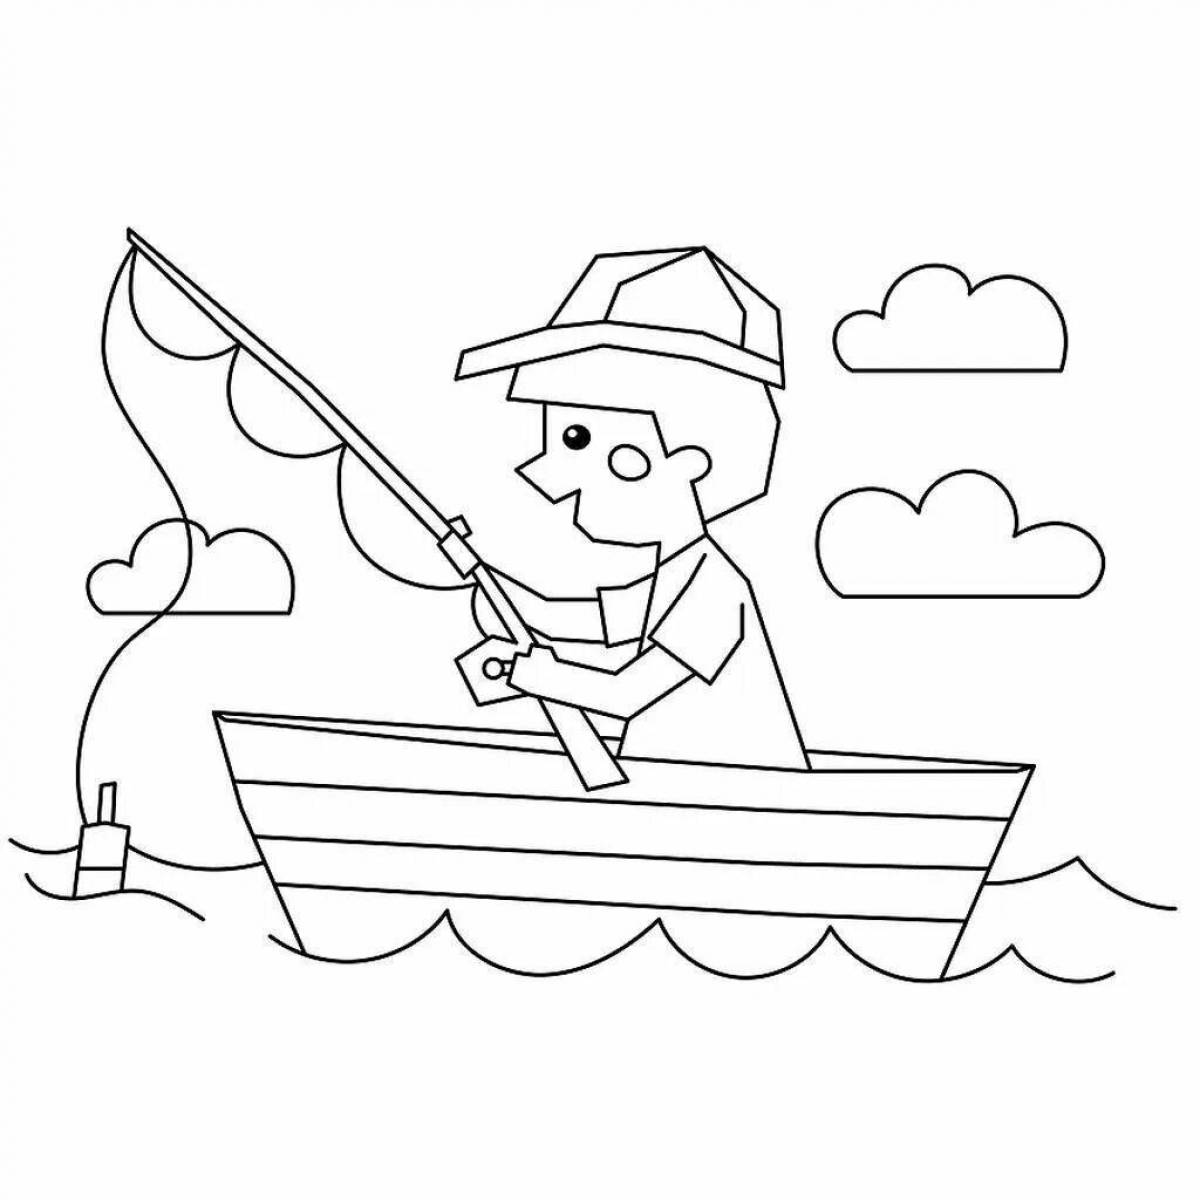 Cheerful fisherman coloring for children